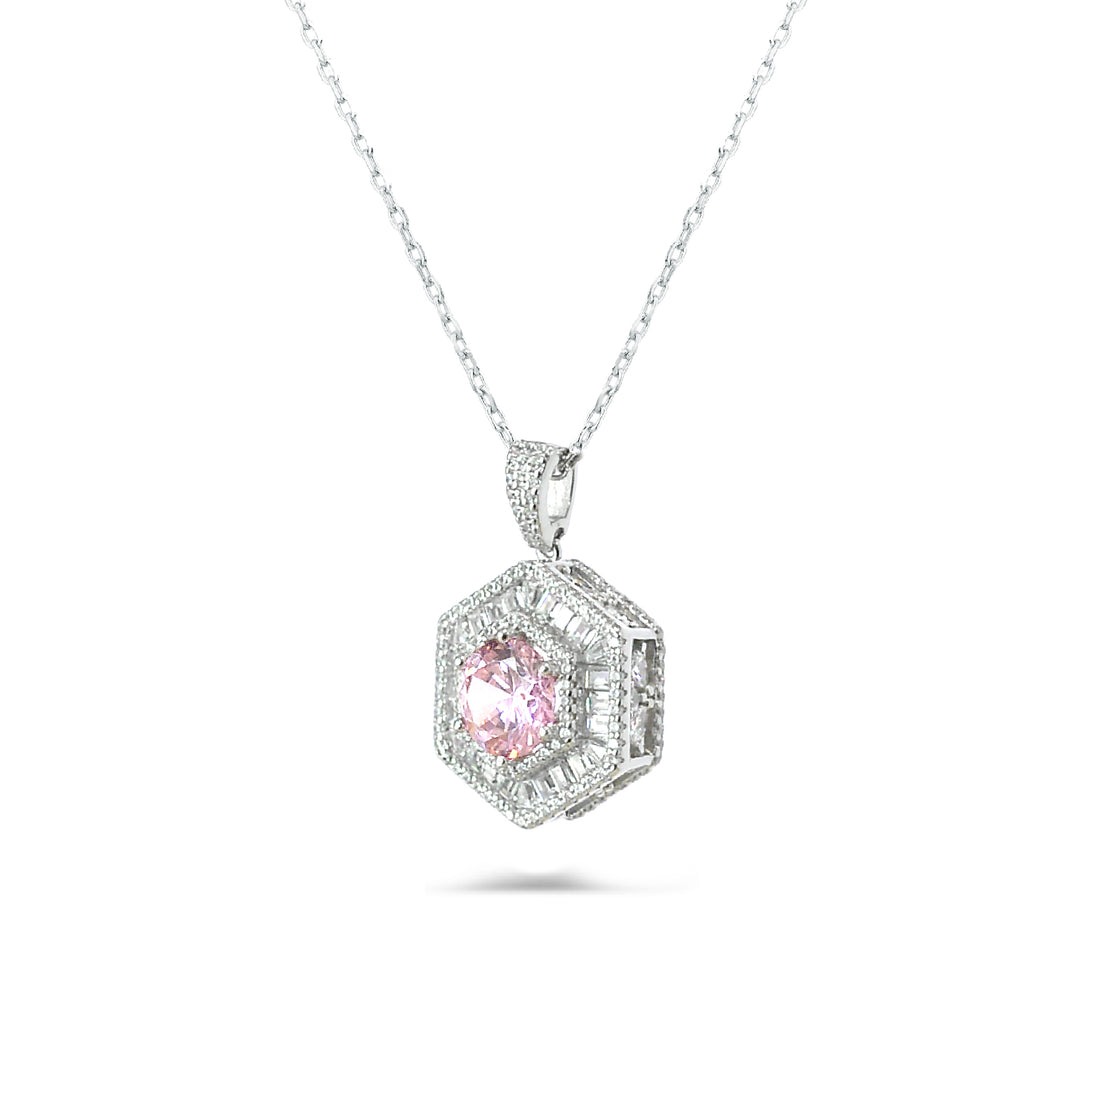 Stunning Silver Zircon Necklace by Dolce Mondo for Elegant Ladies